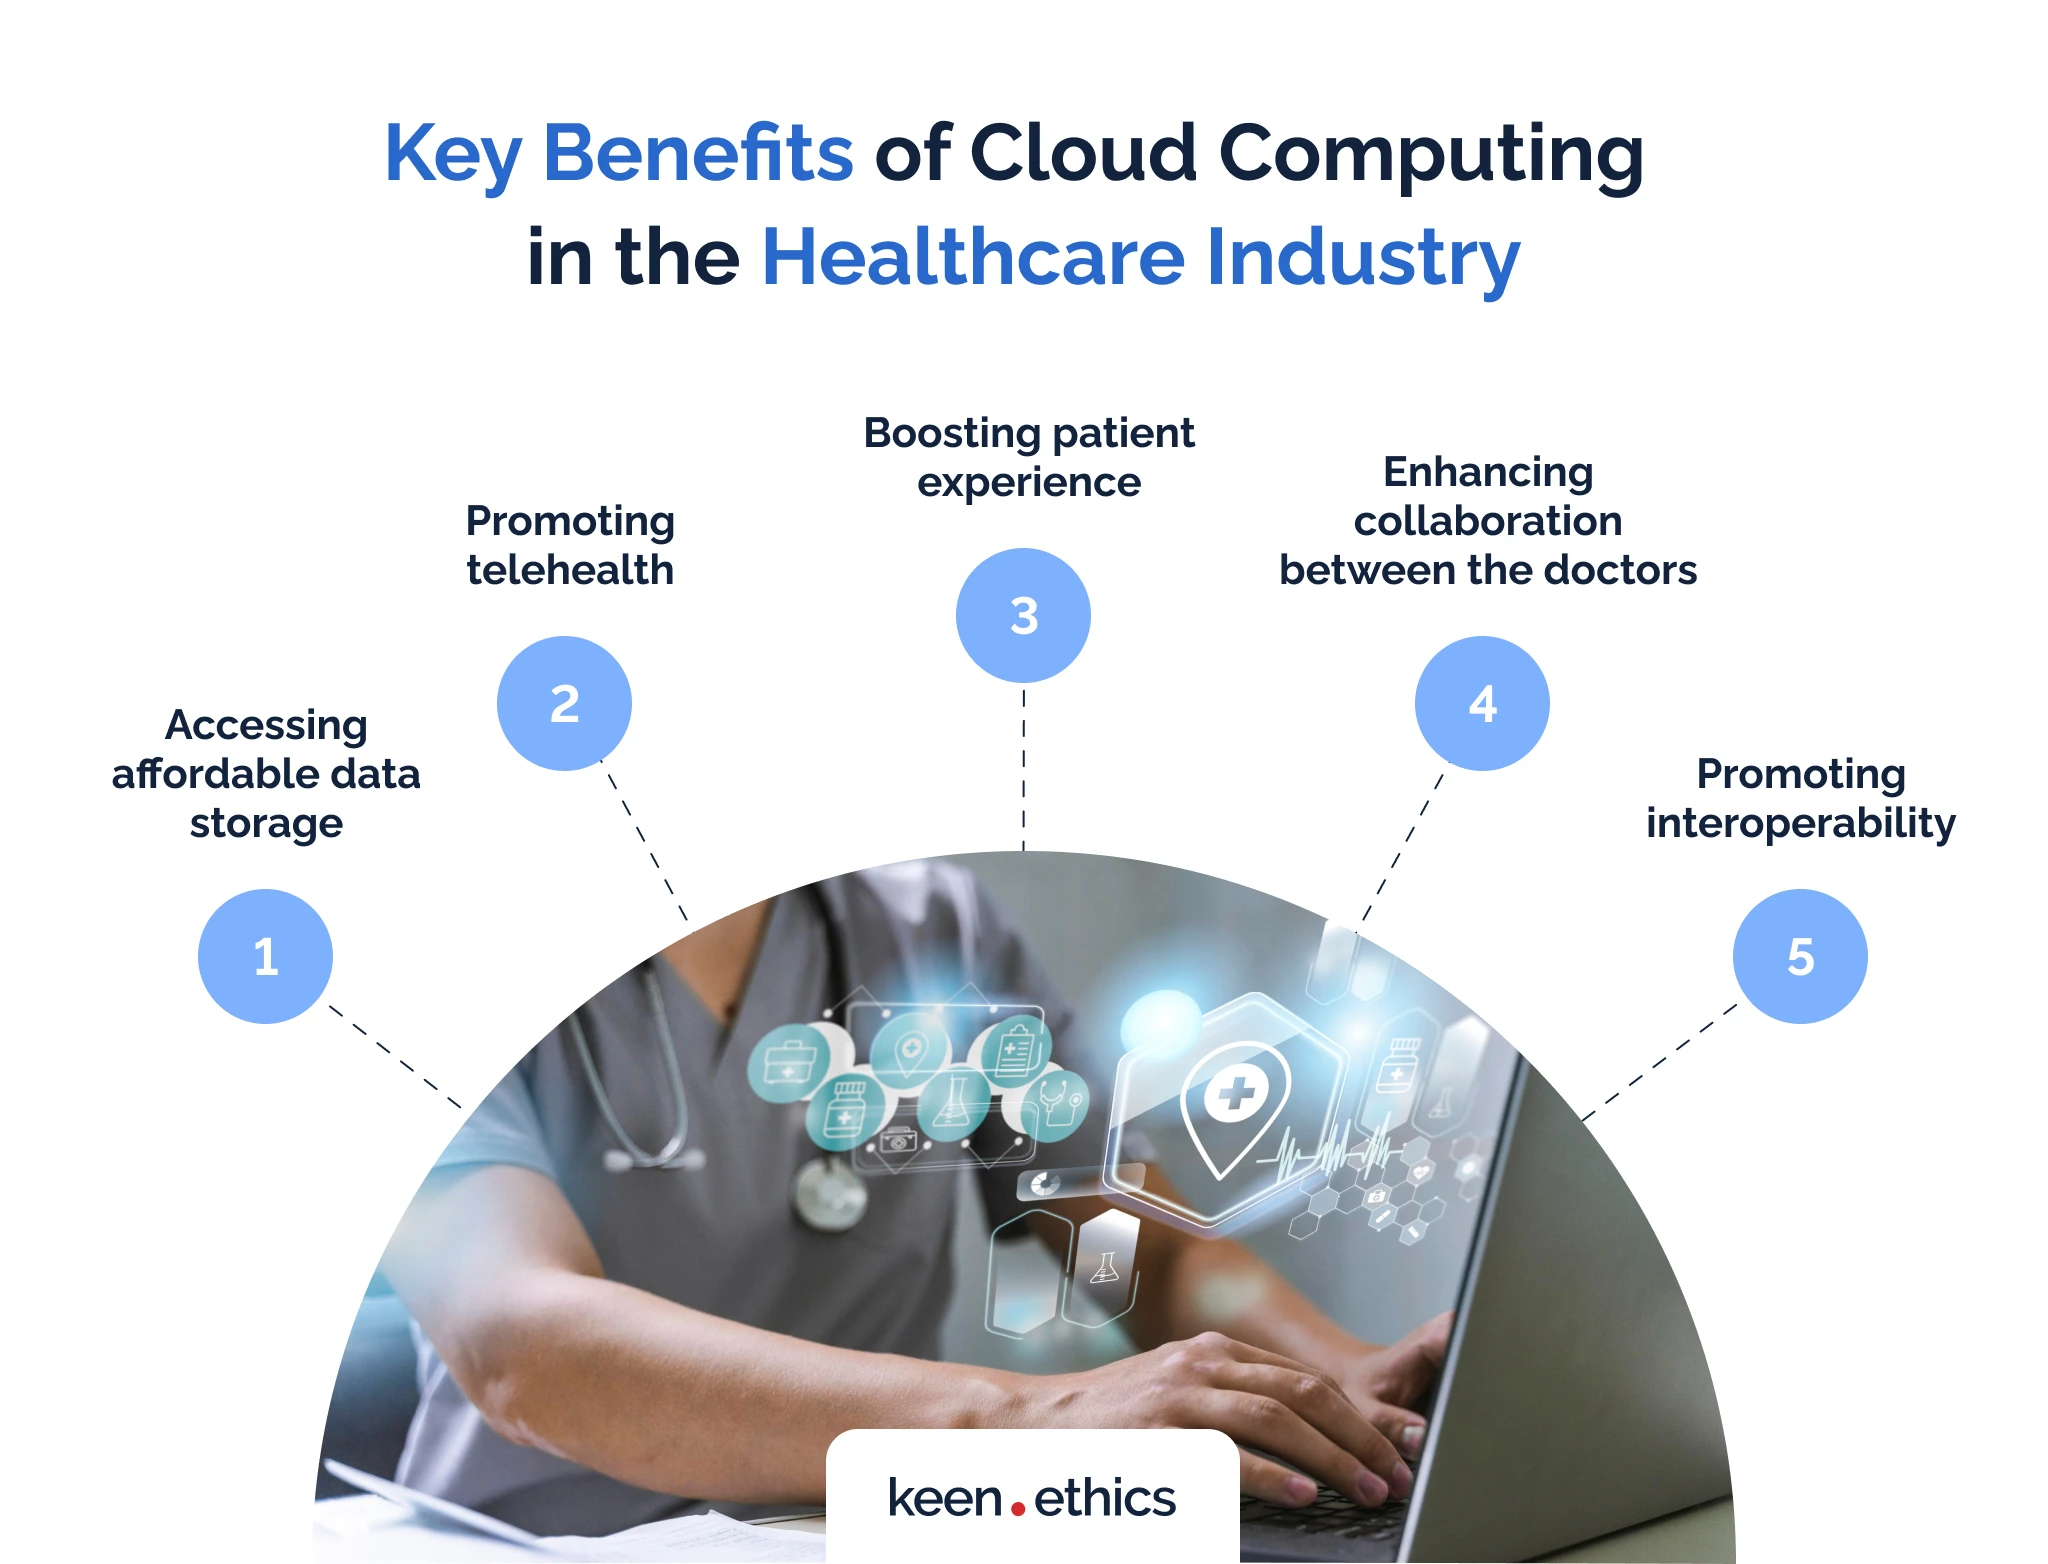 Key benefits of cloud computing in the healthcare industry